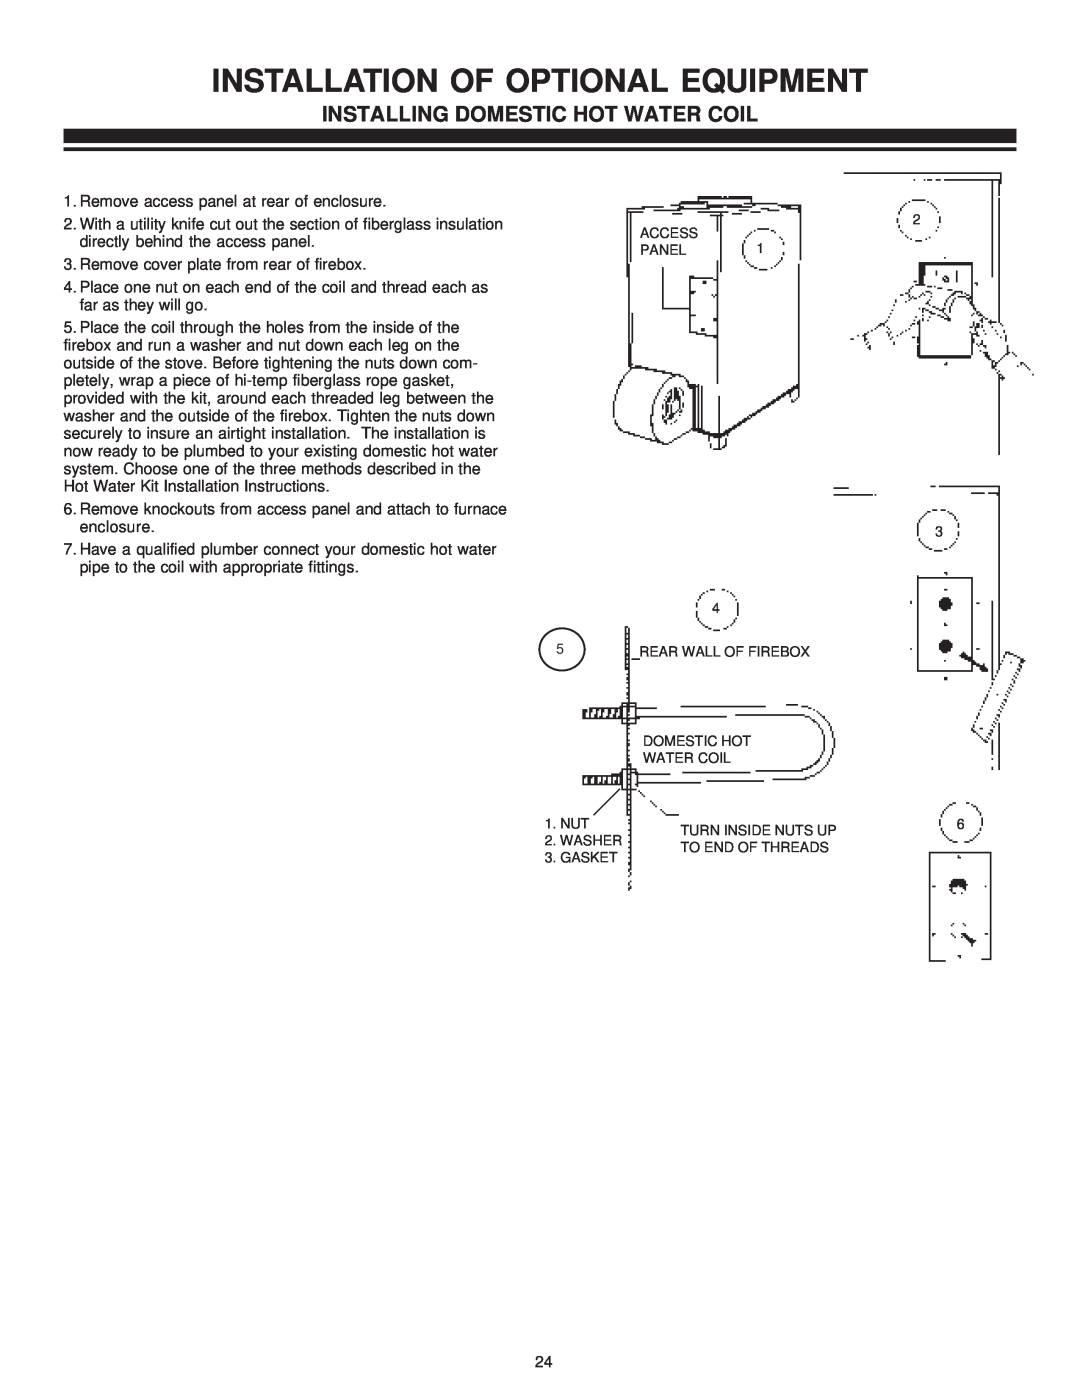 United States Stove 1800, 1600 manual Installation Of Optional Equipment, Installing Domestic Hot Water Coil 